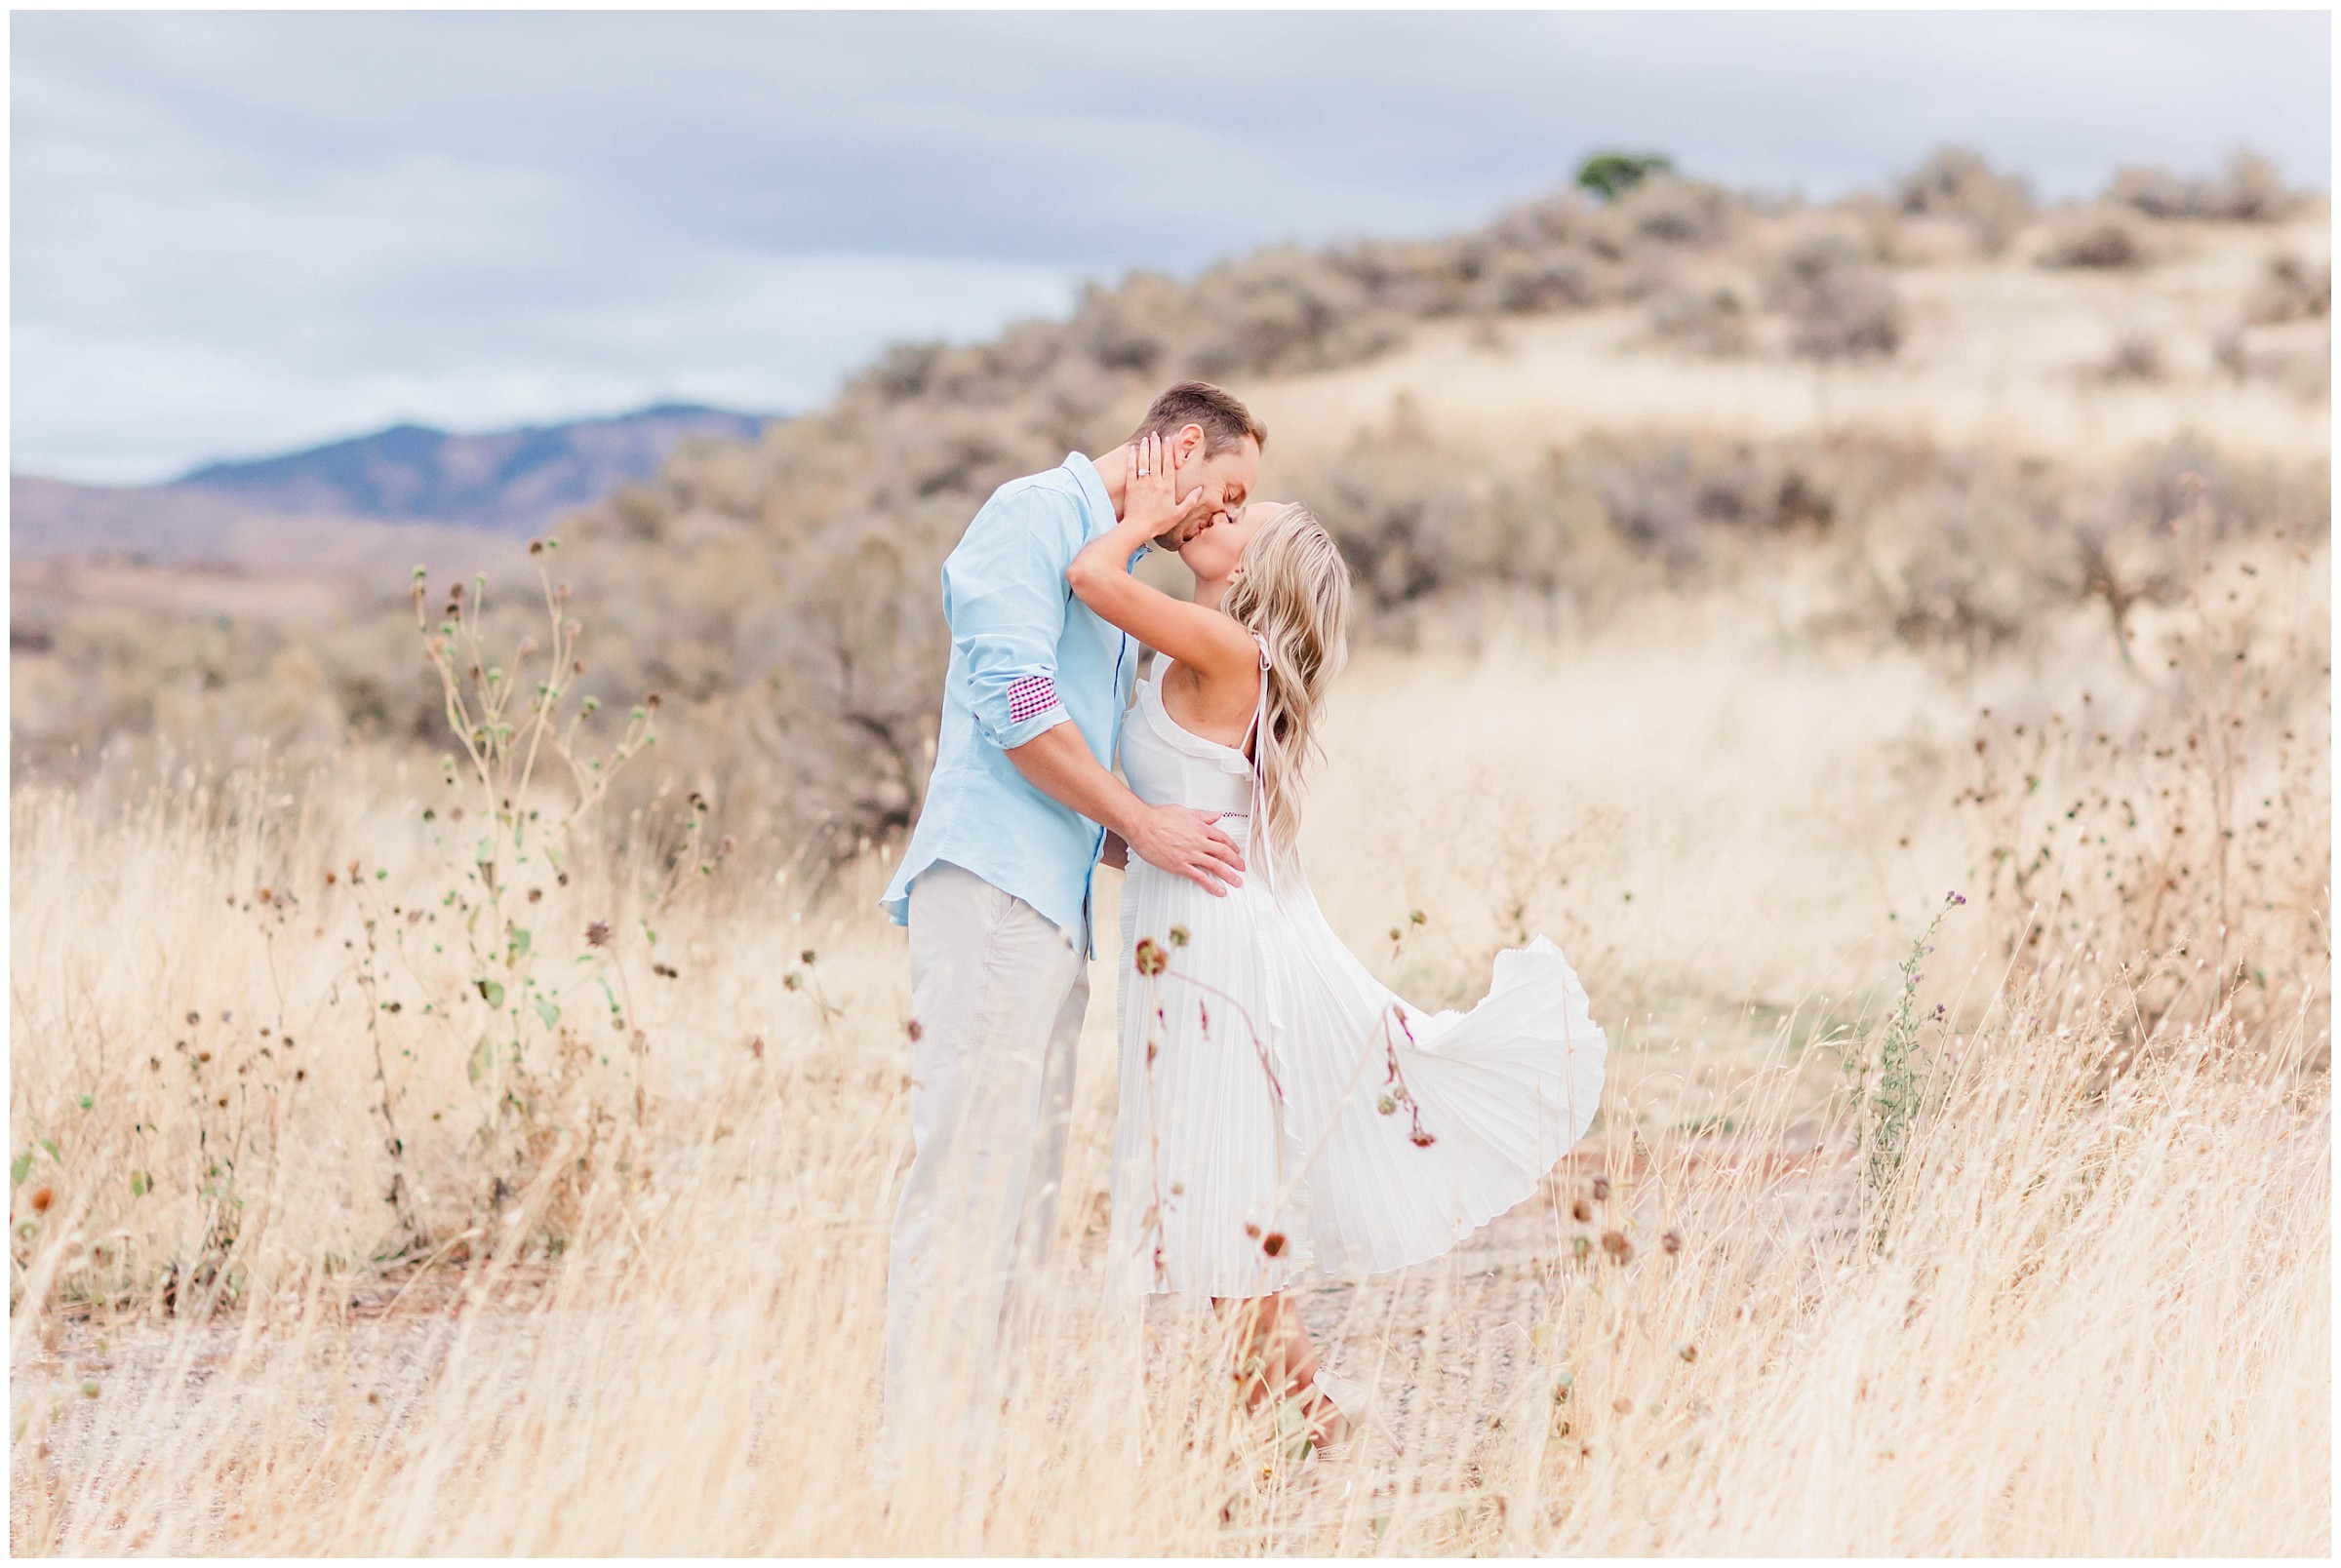 Boise Foothills Engagement photo with a man in a blue shirt kissing a woman in a white flowy dress with light colored sagebrush surrounding them.